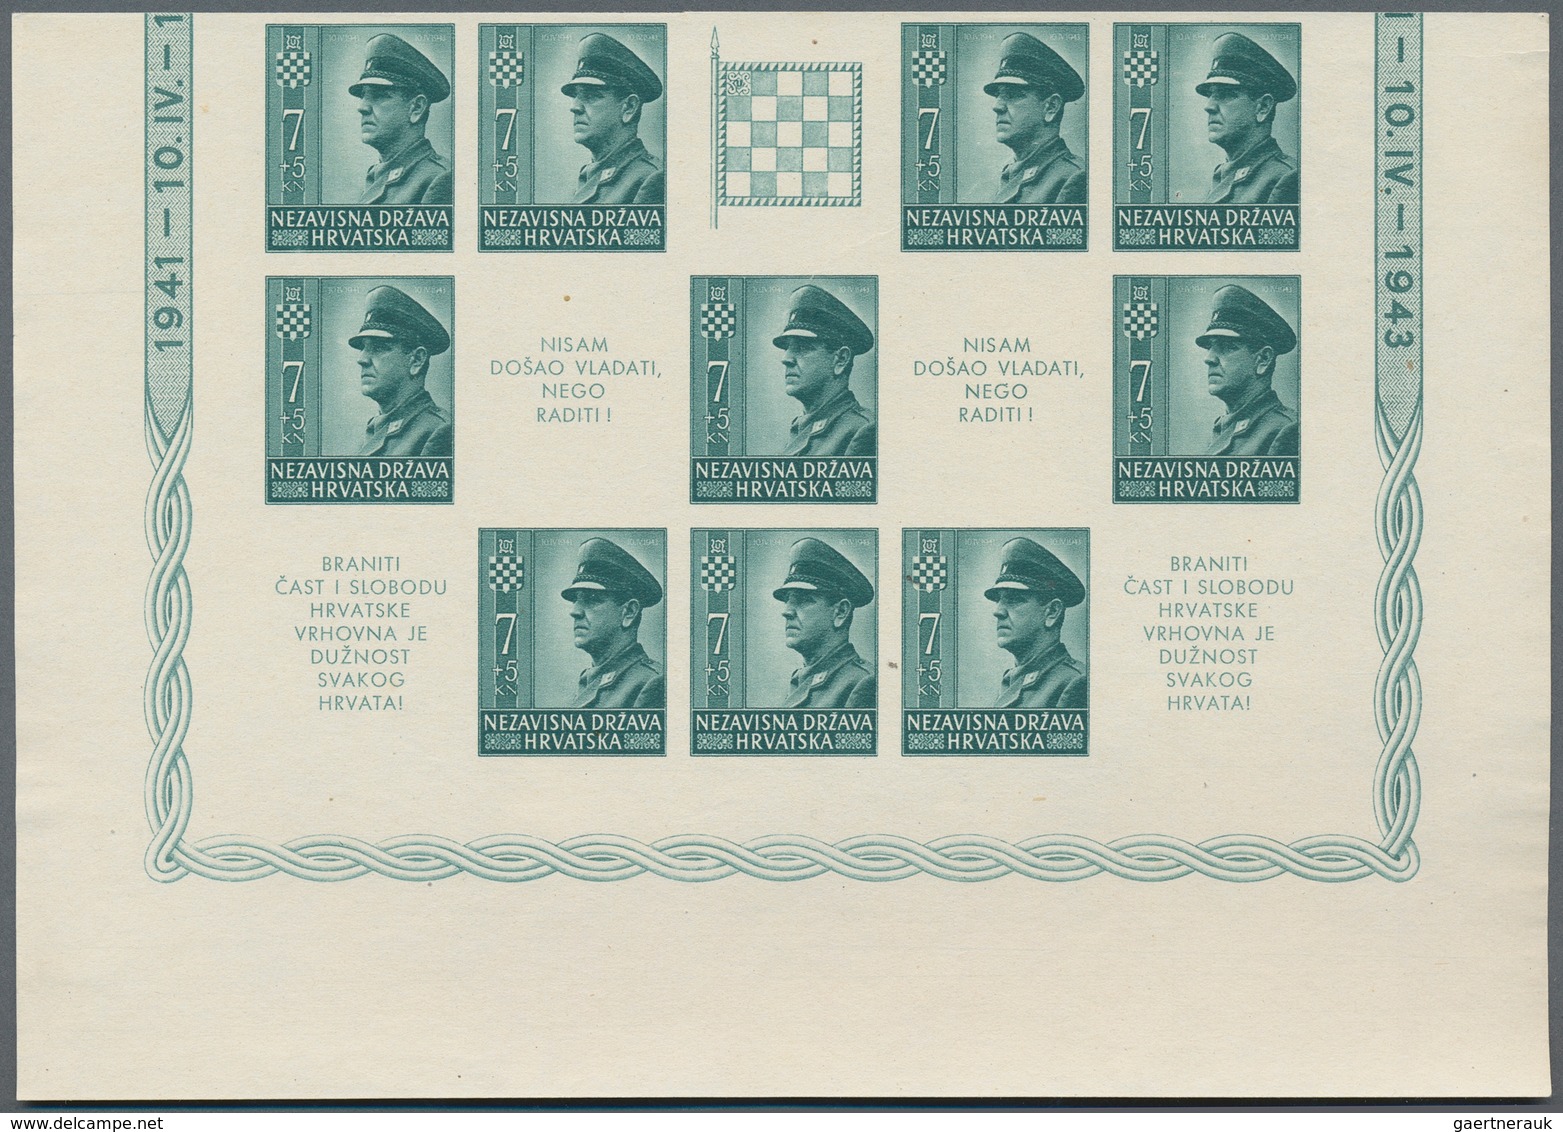 Kroatien: 1943 (10 April). Croat Youth Fund. State President A. Pavelic, 16 Stamps, Central Label Wi - Kroatien